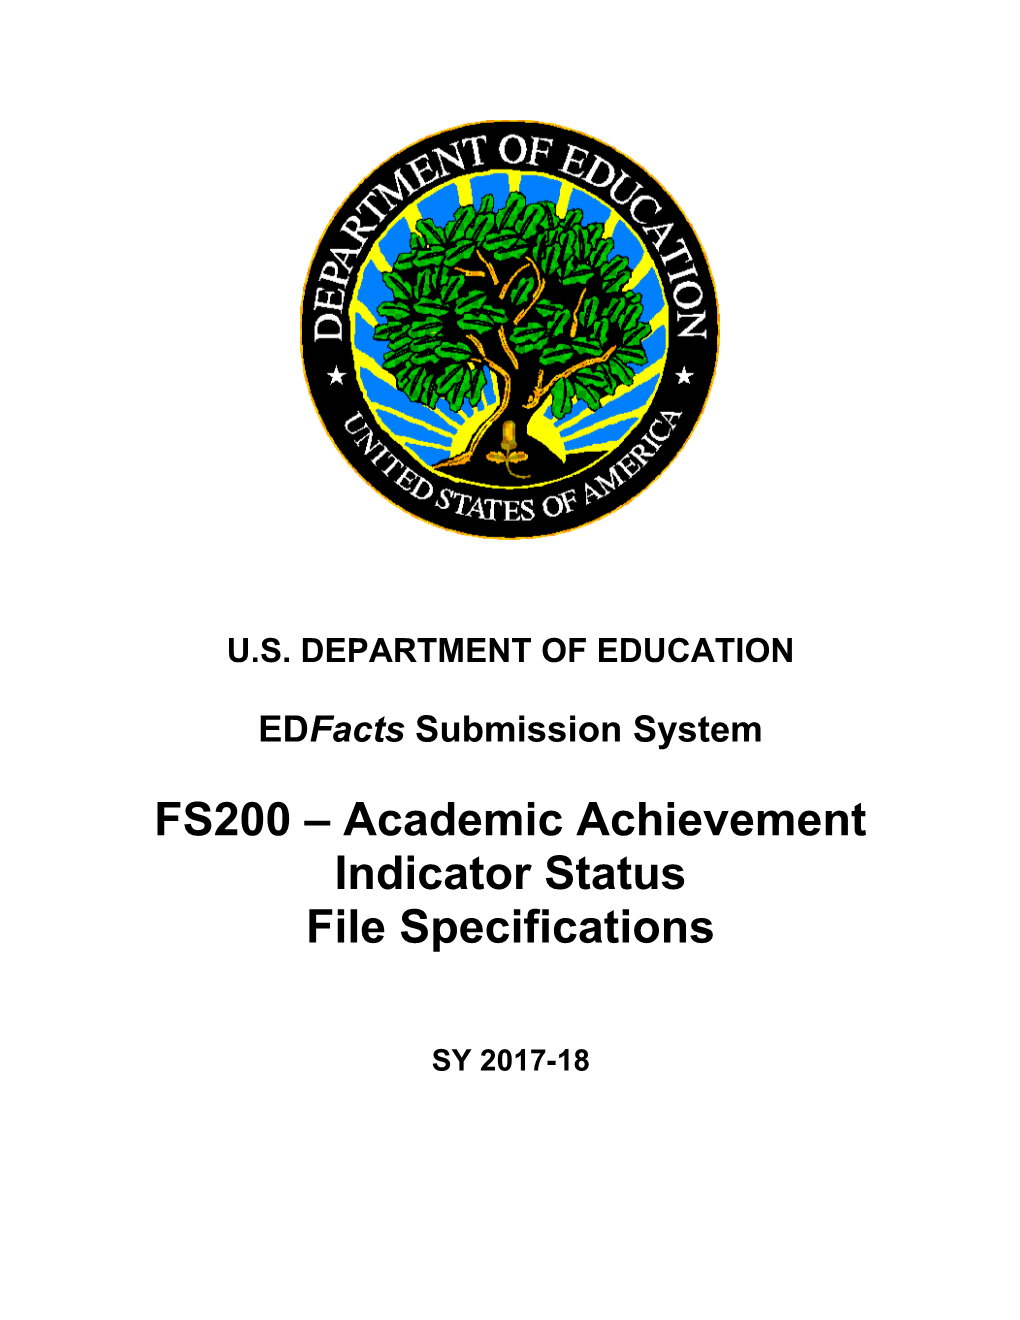 FS200 Academic Achievement Indicator Status File Specifications (Msword)